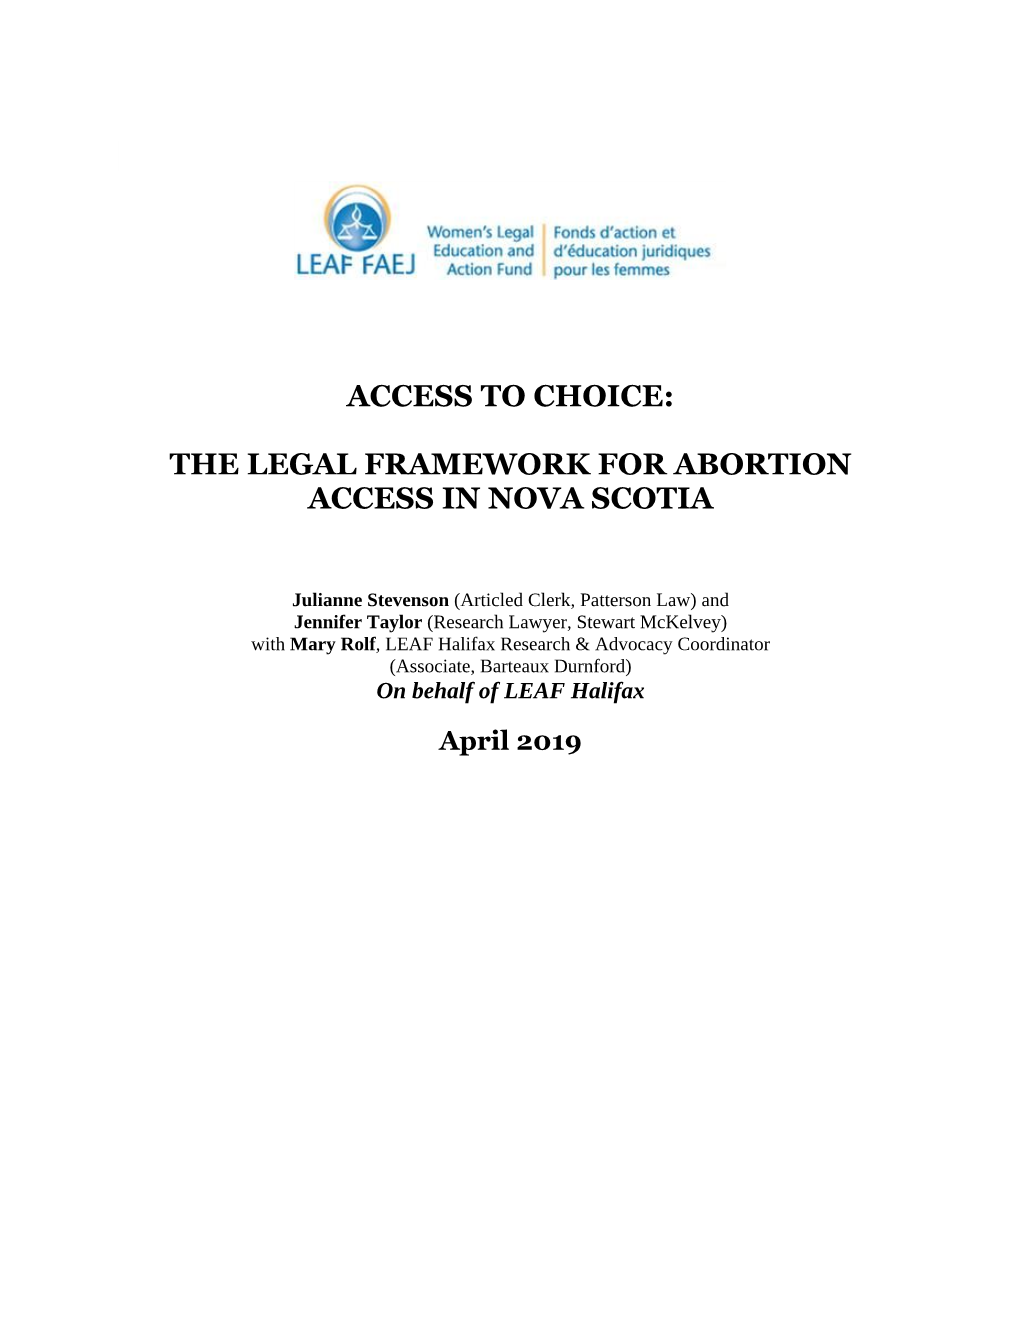 The Legal Framework for Abortion Access in Nova Scotia